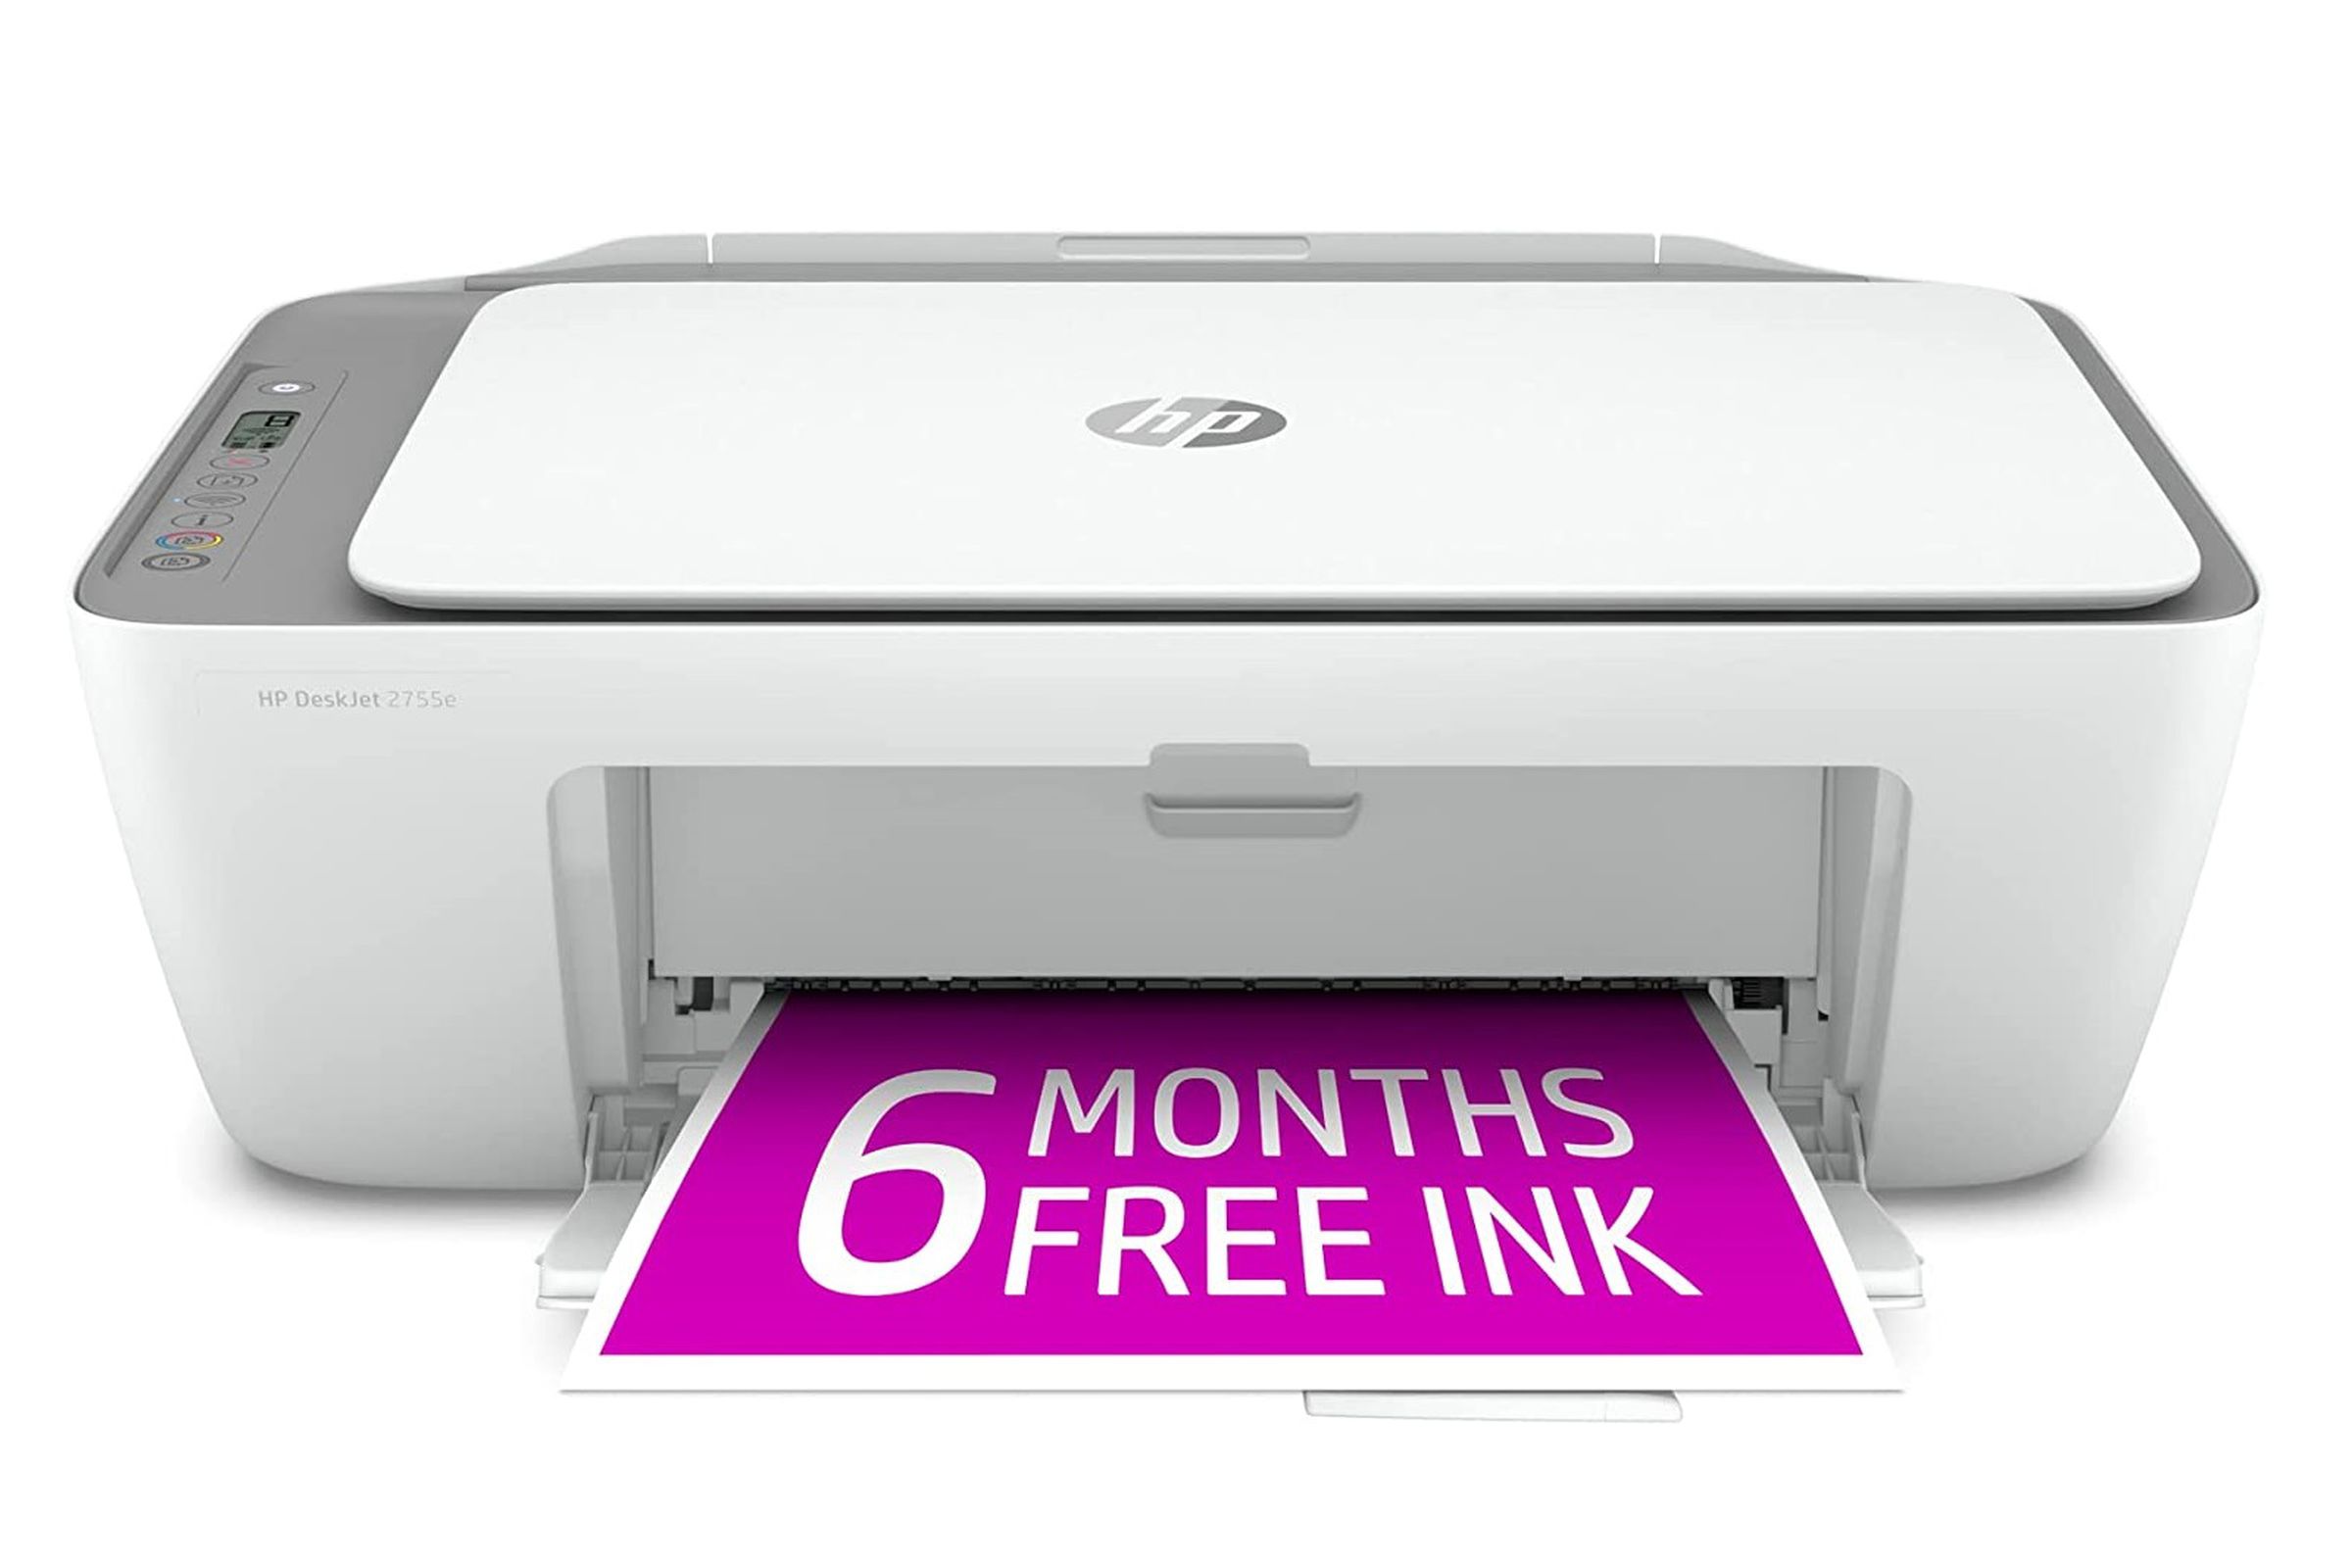 A white and gray multifunction printer with a silver HP logo up top and a purple piece of paper coming out the front that reads “6 months free ink.”